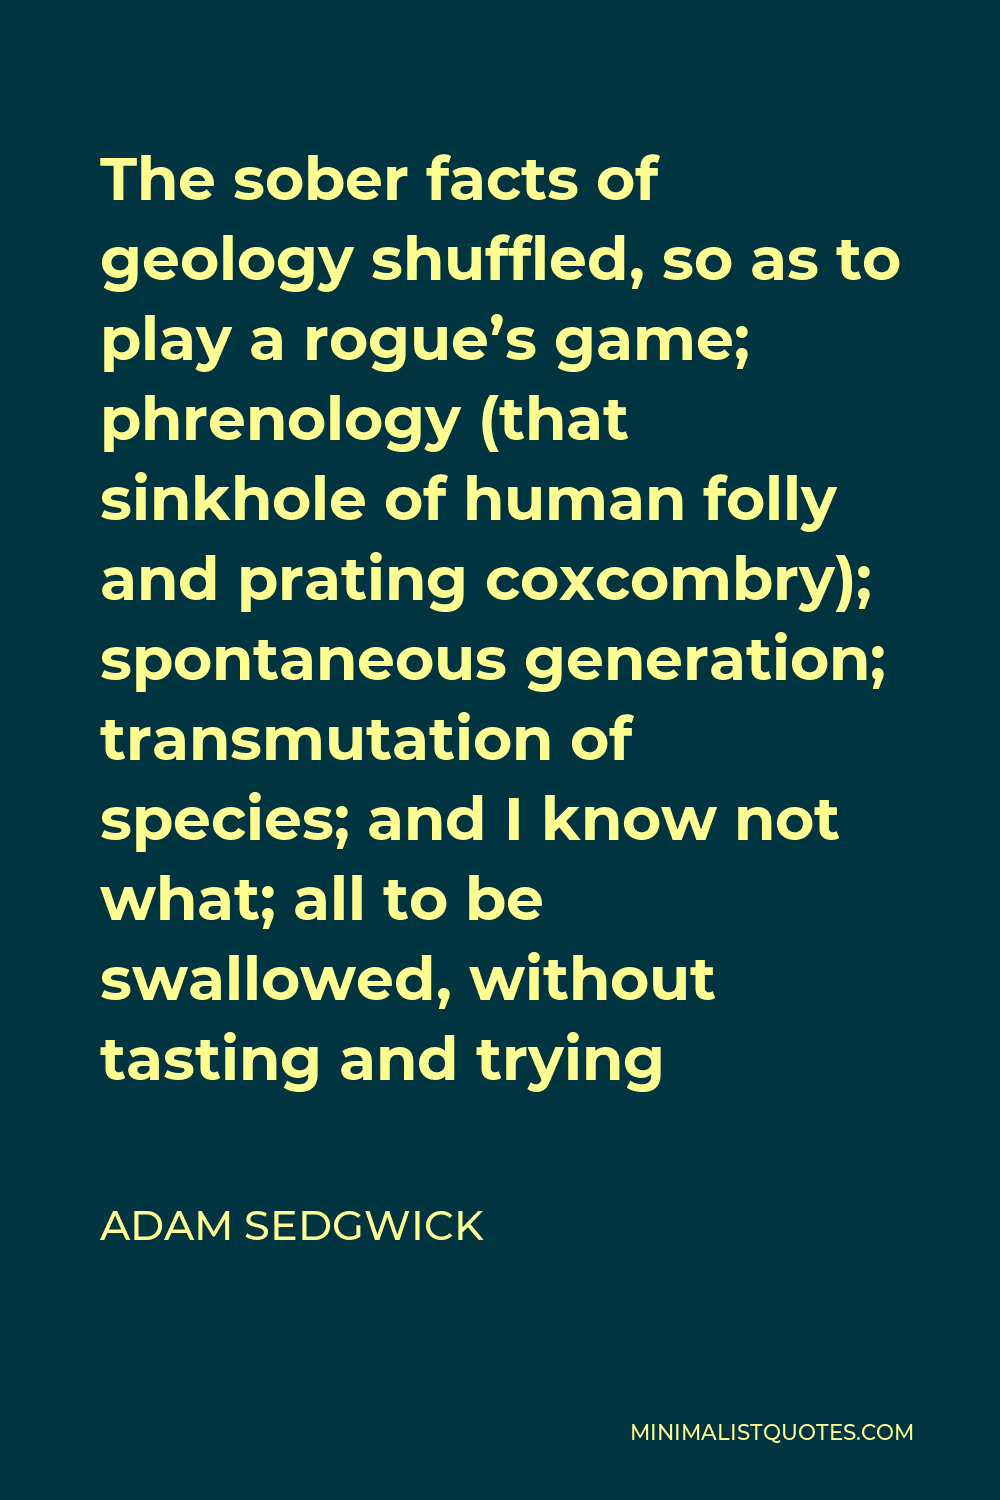 Adam Sedgwick Quote - The sober facts of geology shuffled, so as to play a rogue’s game; phrenology (that sinkhole of human folly and prating coxcombry); spontaneous generation; transmutation of species; and I know not what; all to be swallowed, without tasting and trying